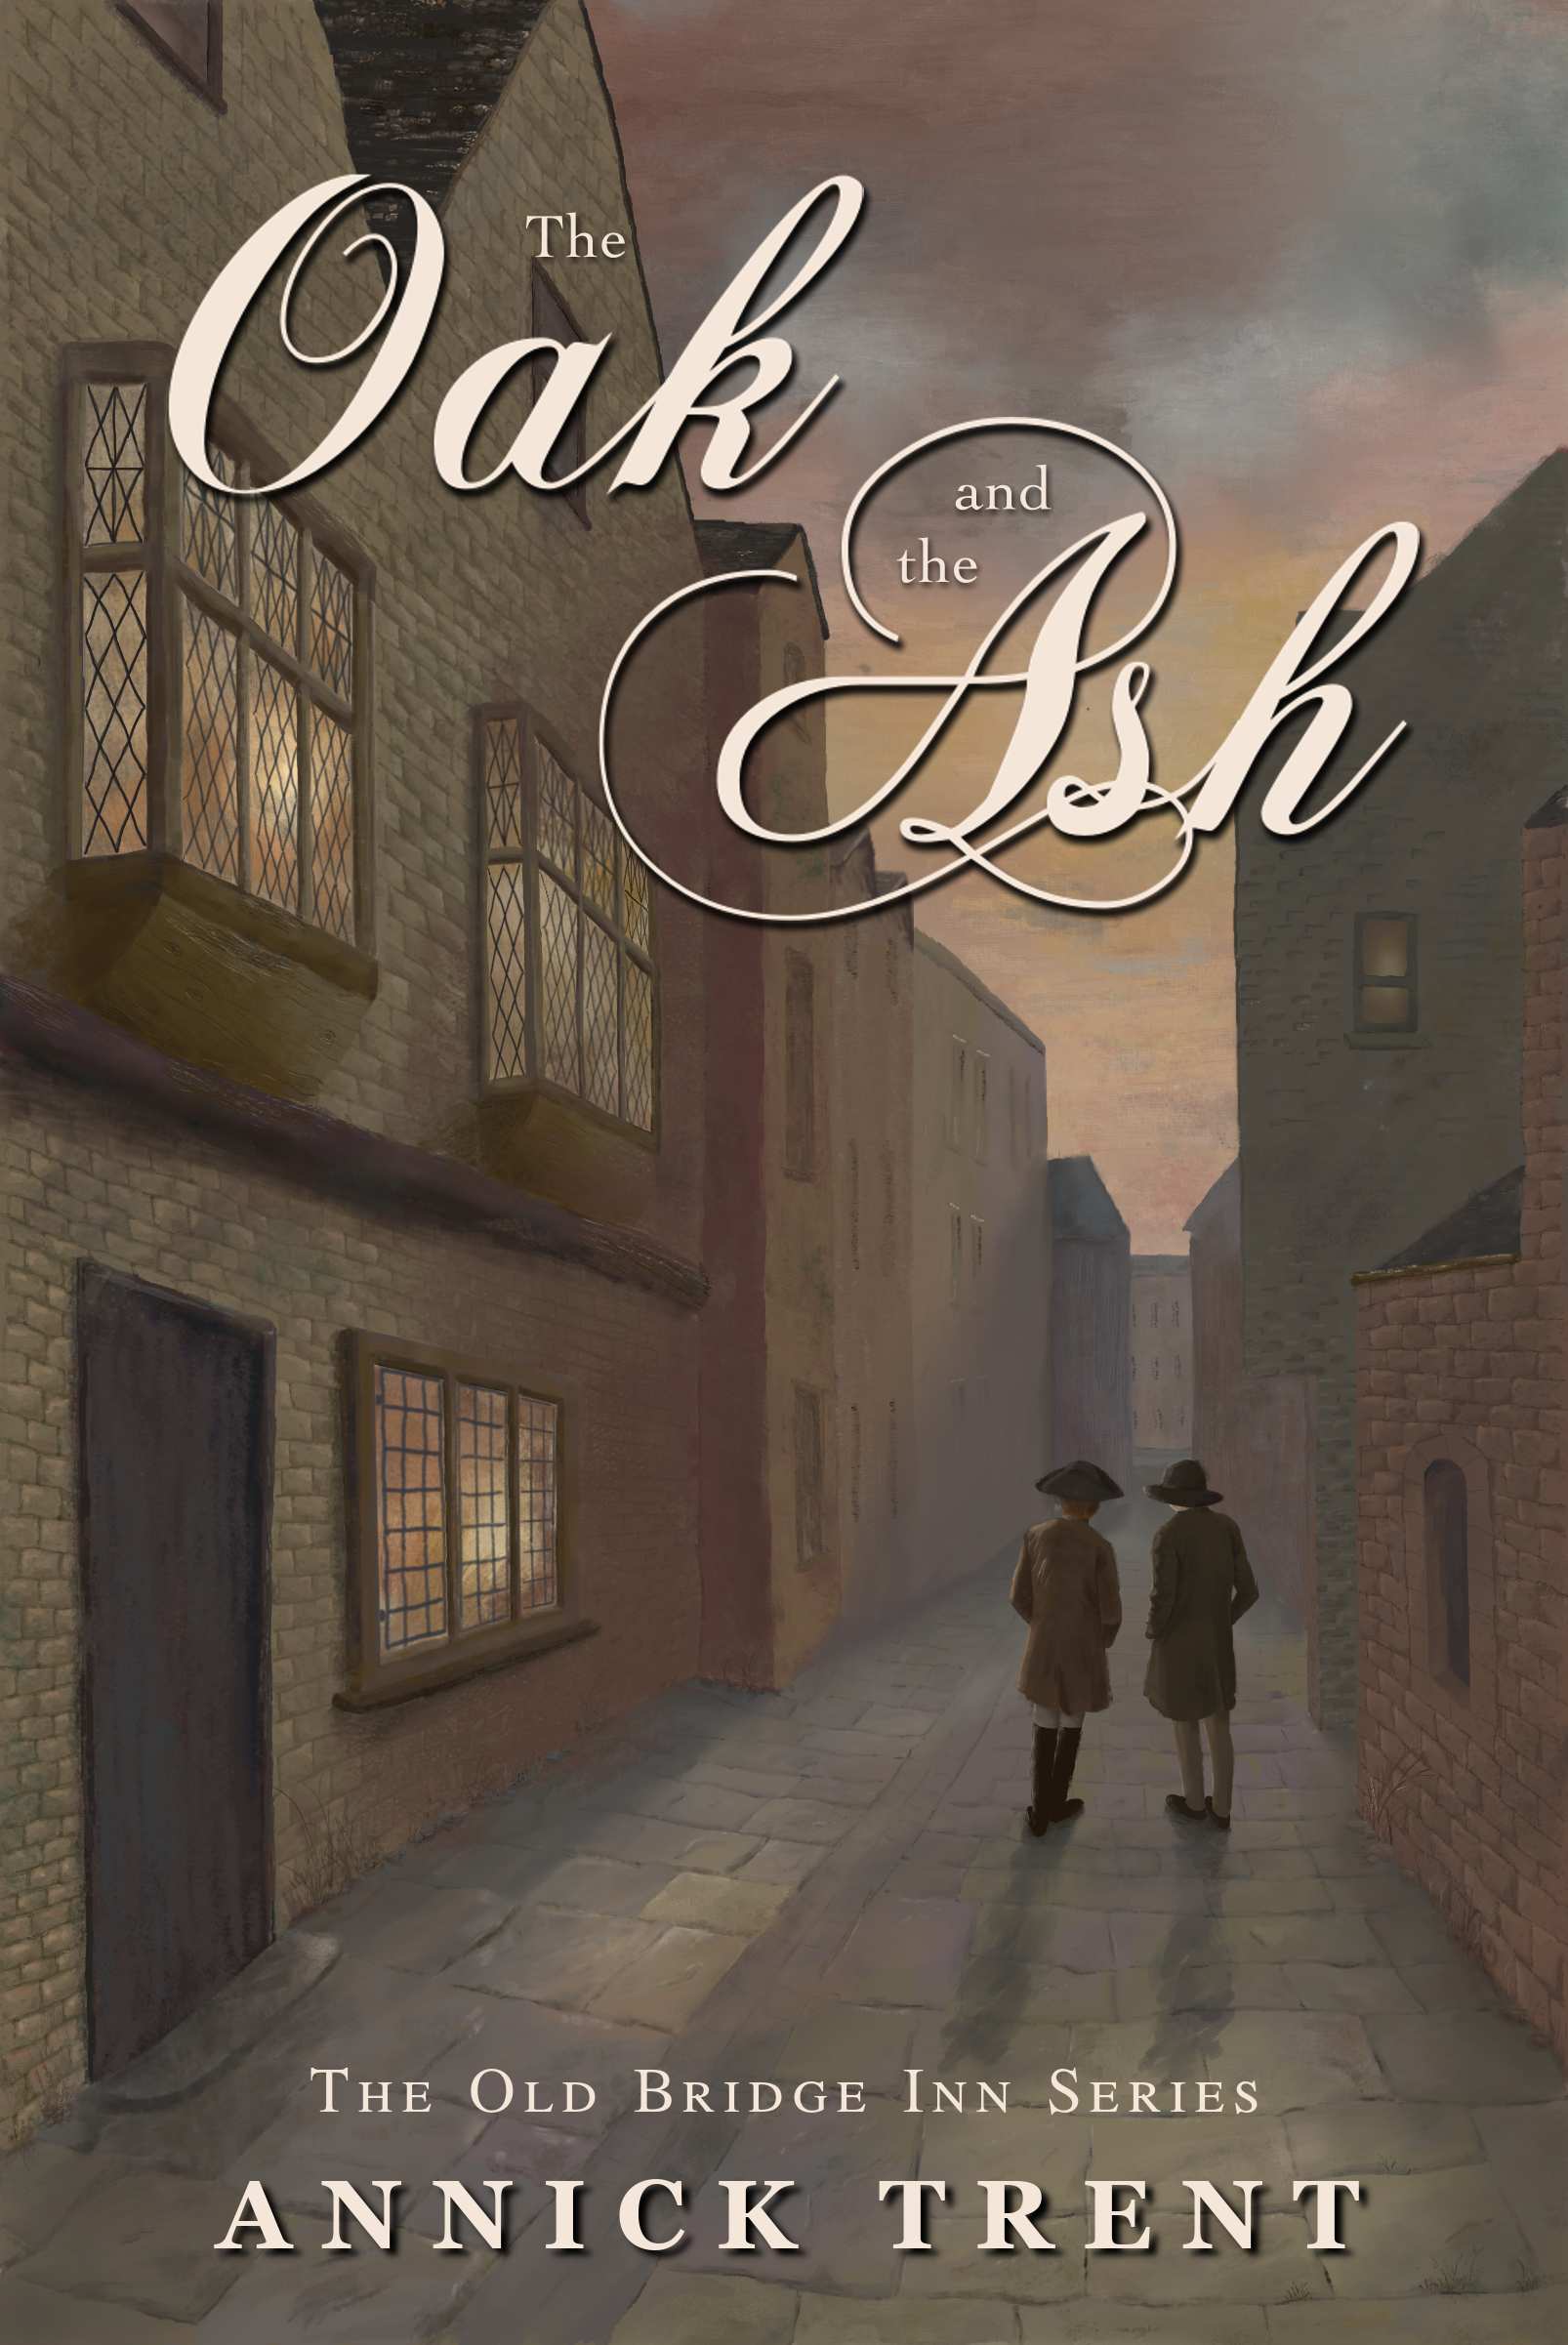 book cover of The Oak and the Ash; two men walking together in a London side alley at dawn or dusk